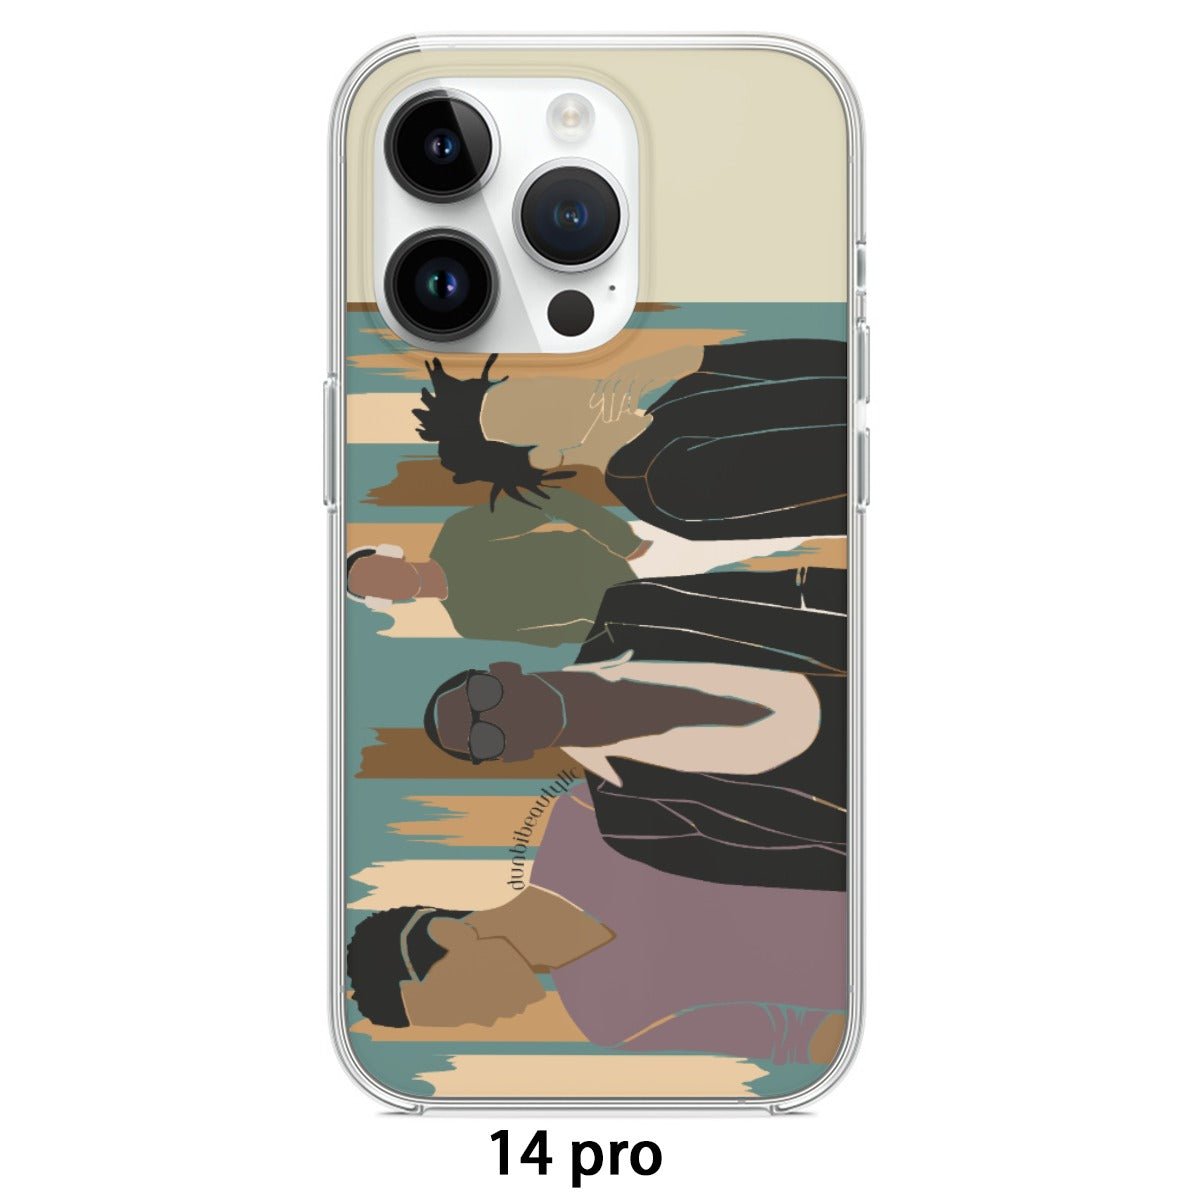 iPhone14 Series Mobile Phone Case | TPU Black Men, Music, Sophistication, Style, Youth, Style #3 (Designed by Dunbi) - DunbiBeauty, LLC